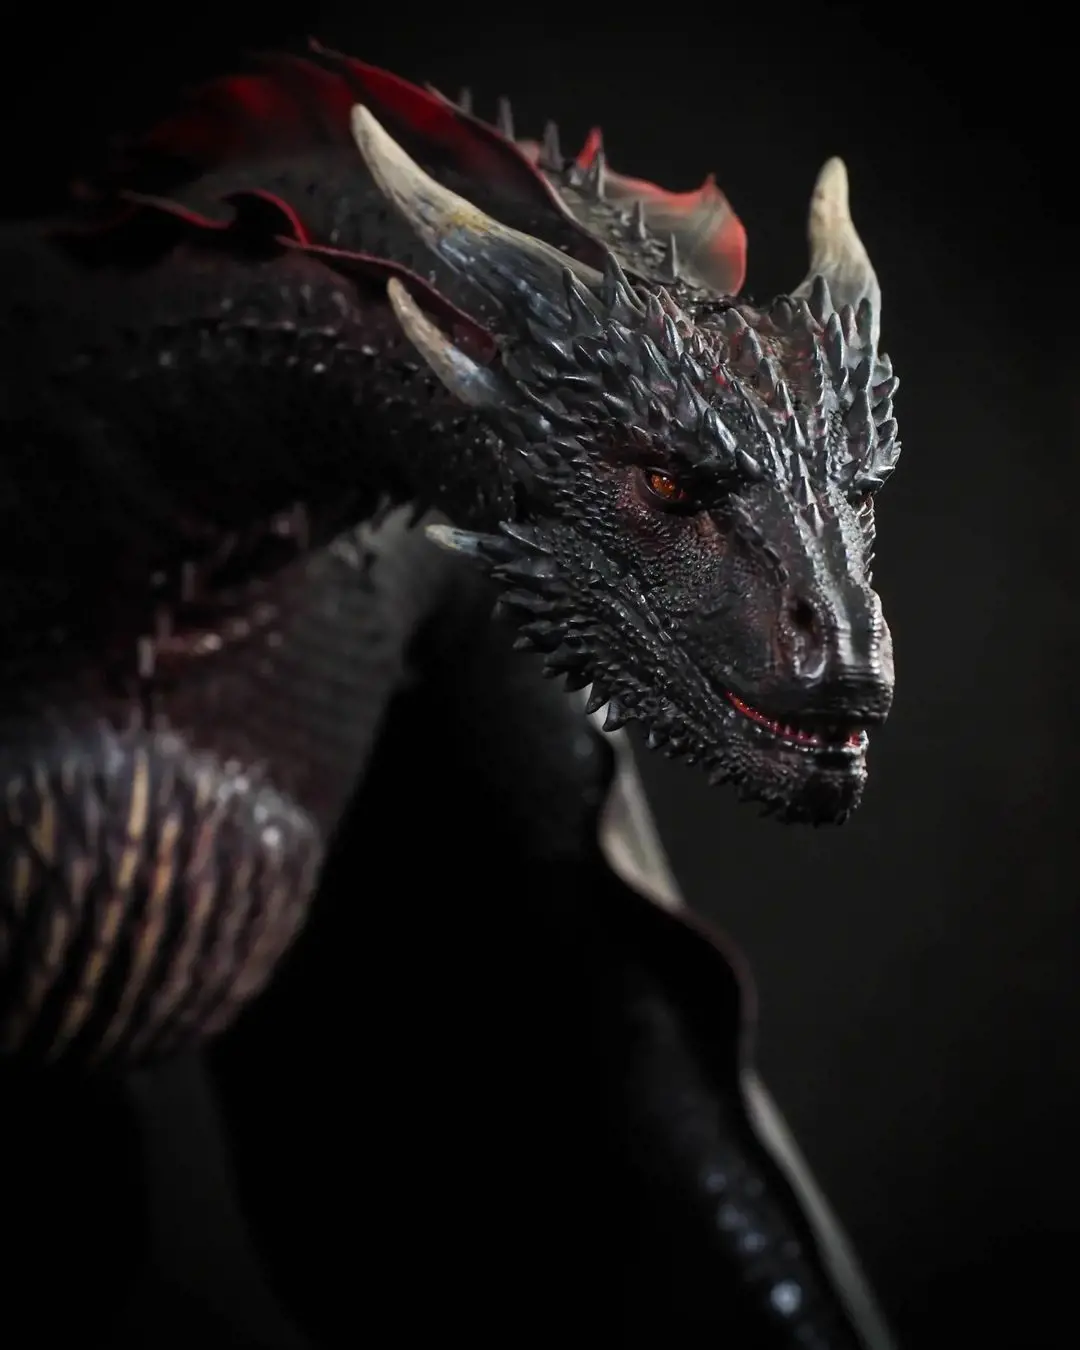 Fan art depicting Drogon from Game of Thrones